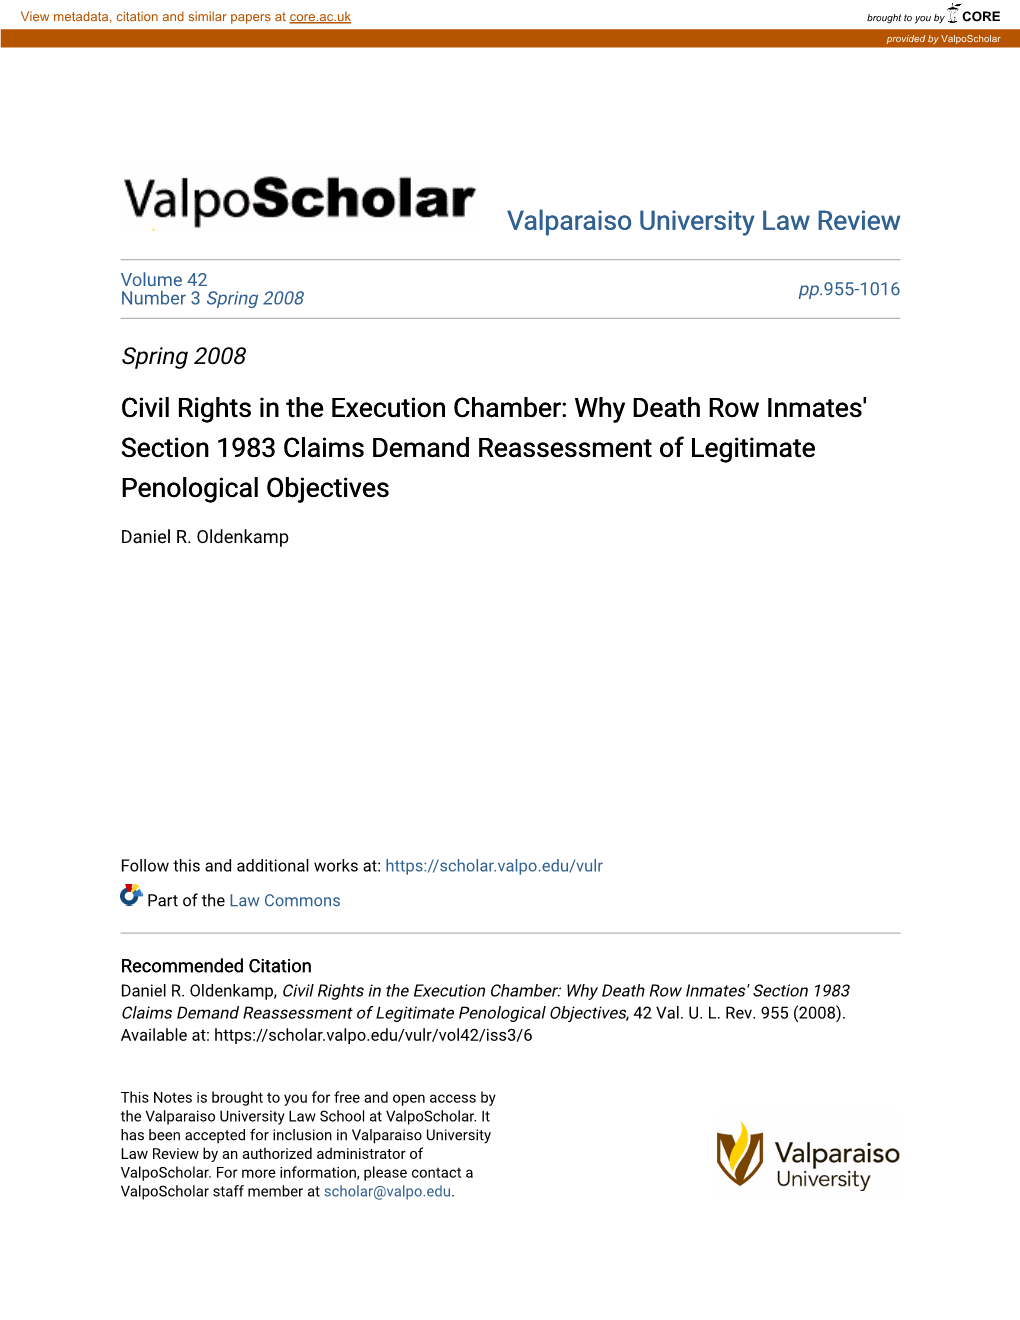 Civil Rights in the Execution Chamber: Why Death Row Inmates' Section 1983 Claims Demand Reassessment of Legitimate Penological Objectives